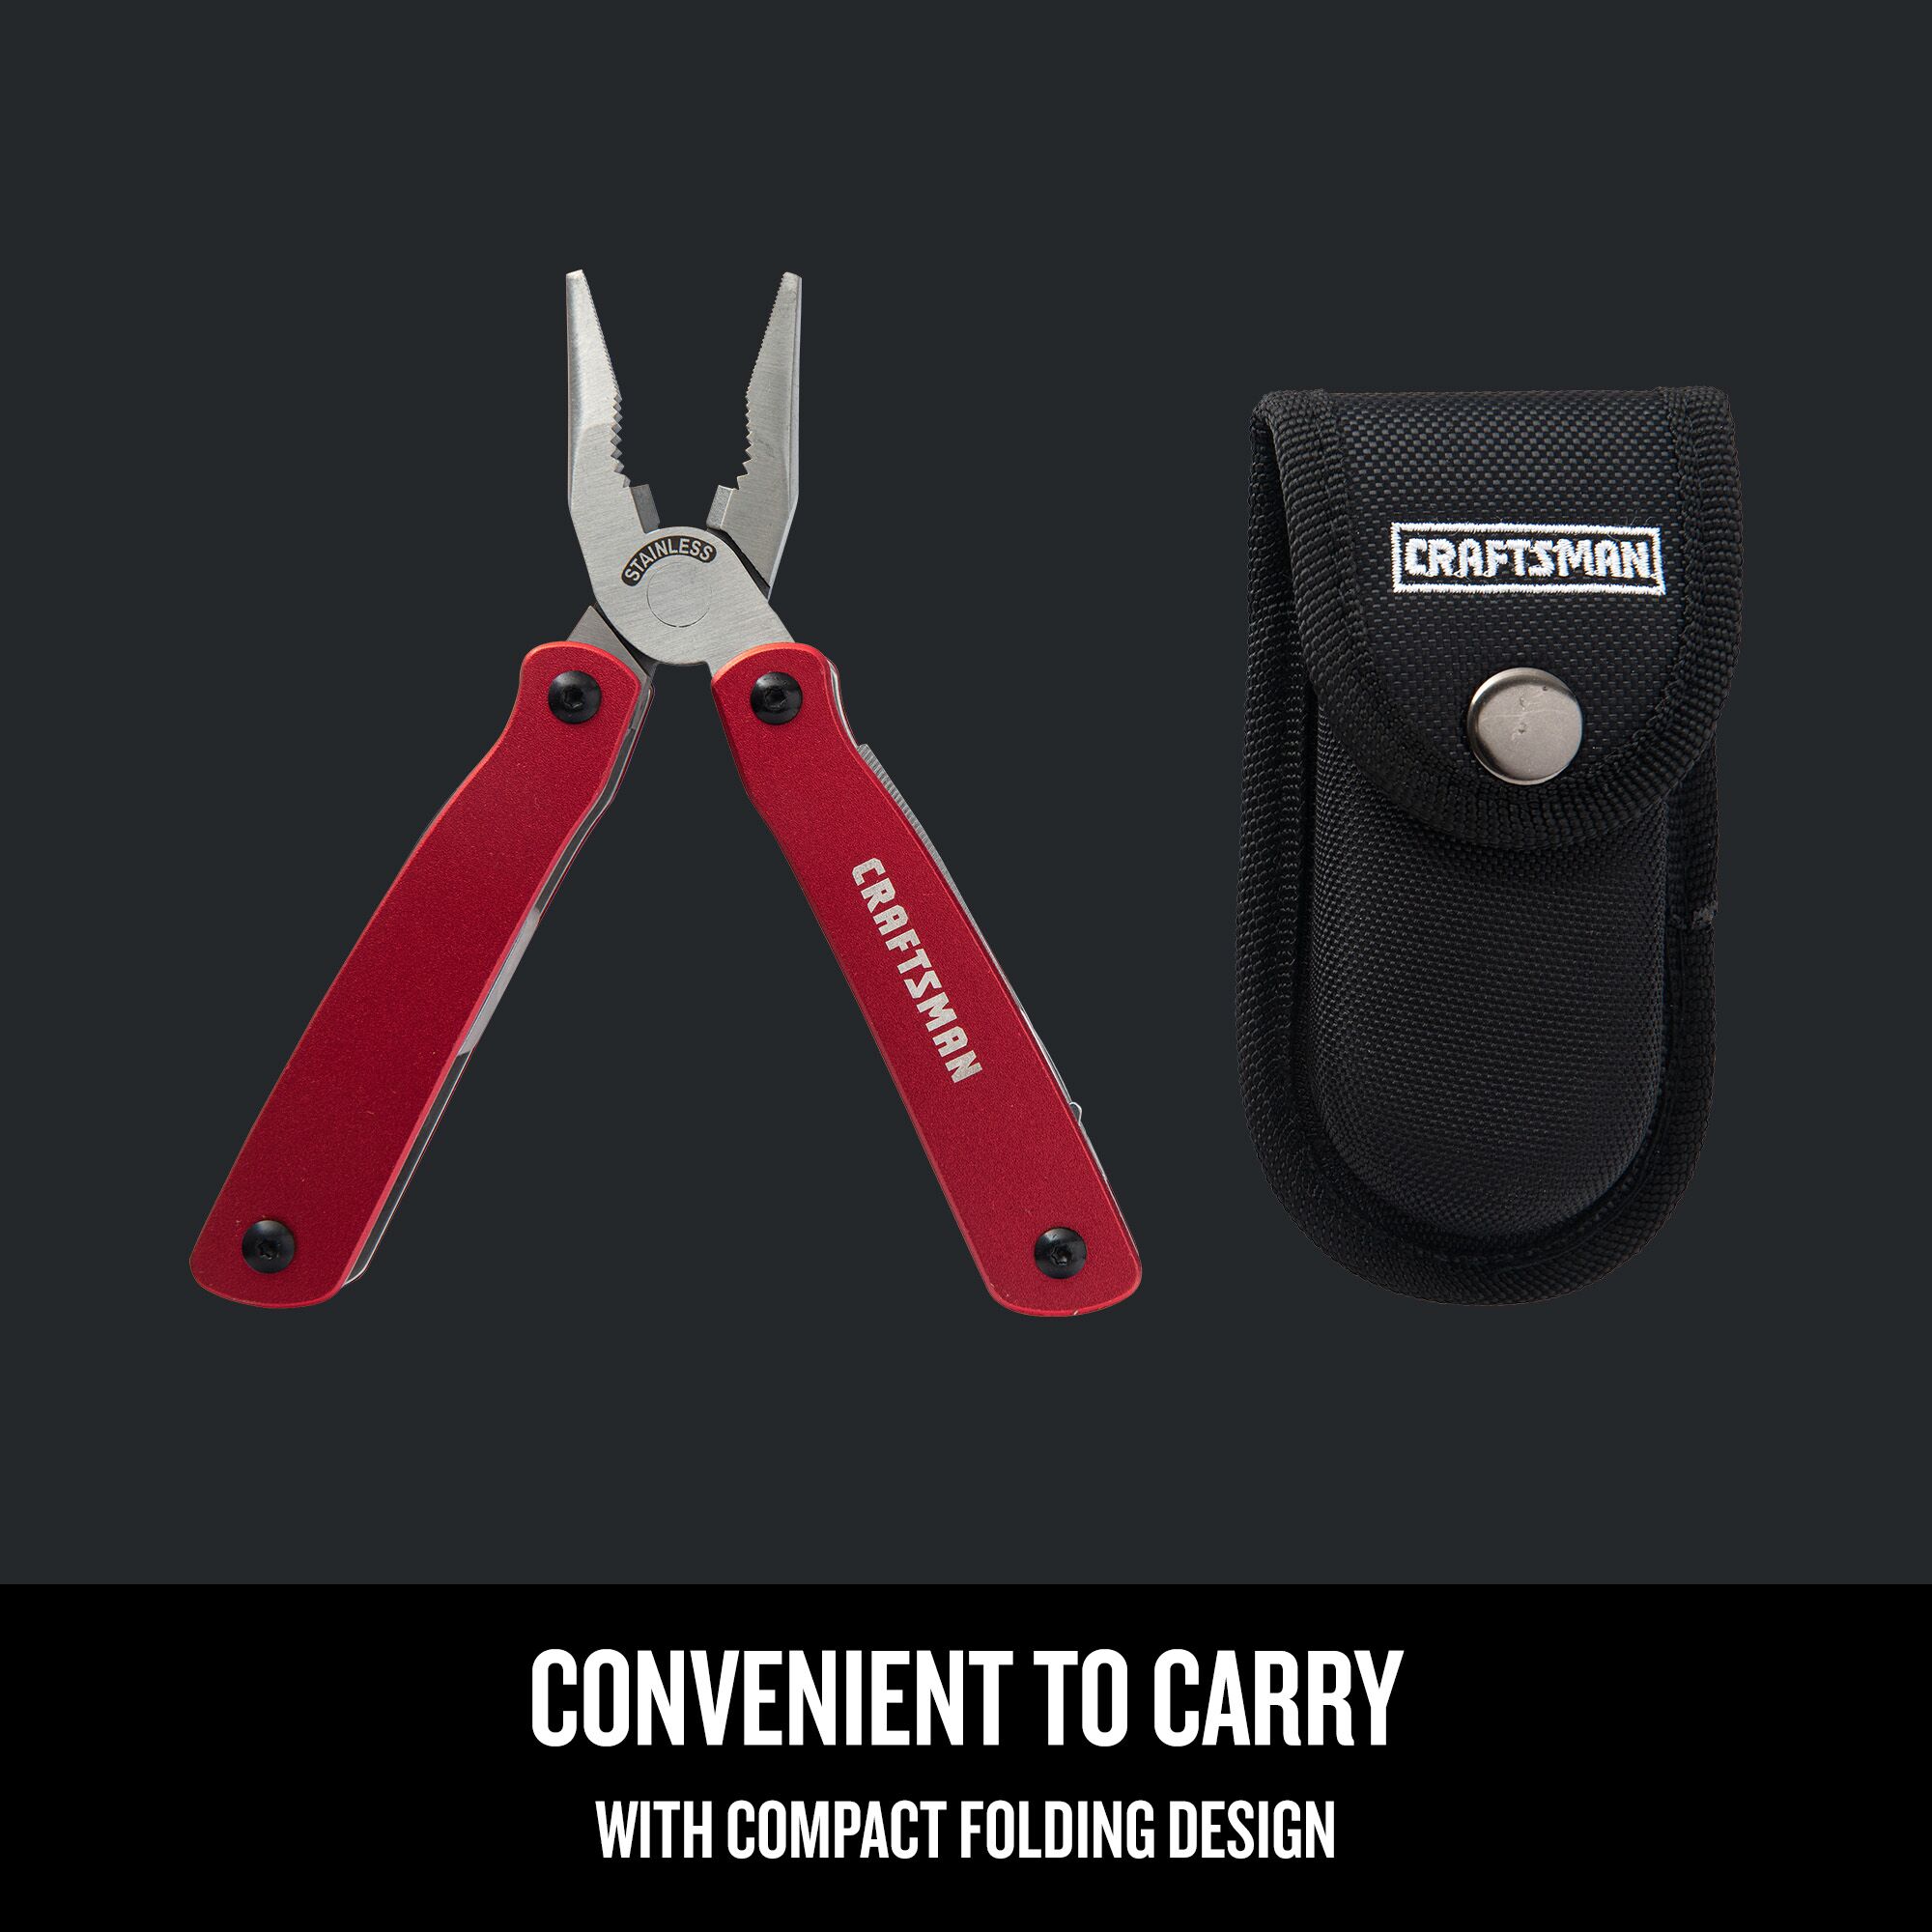 Graphic of CRAFTSMAN Multi-Tools highlighting product features